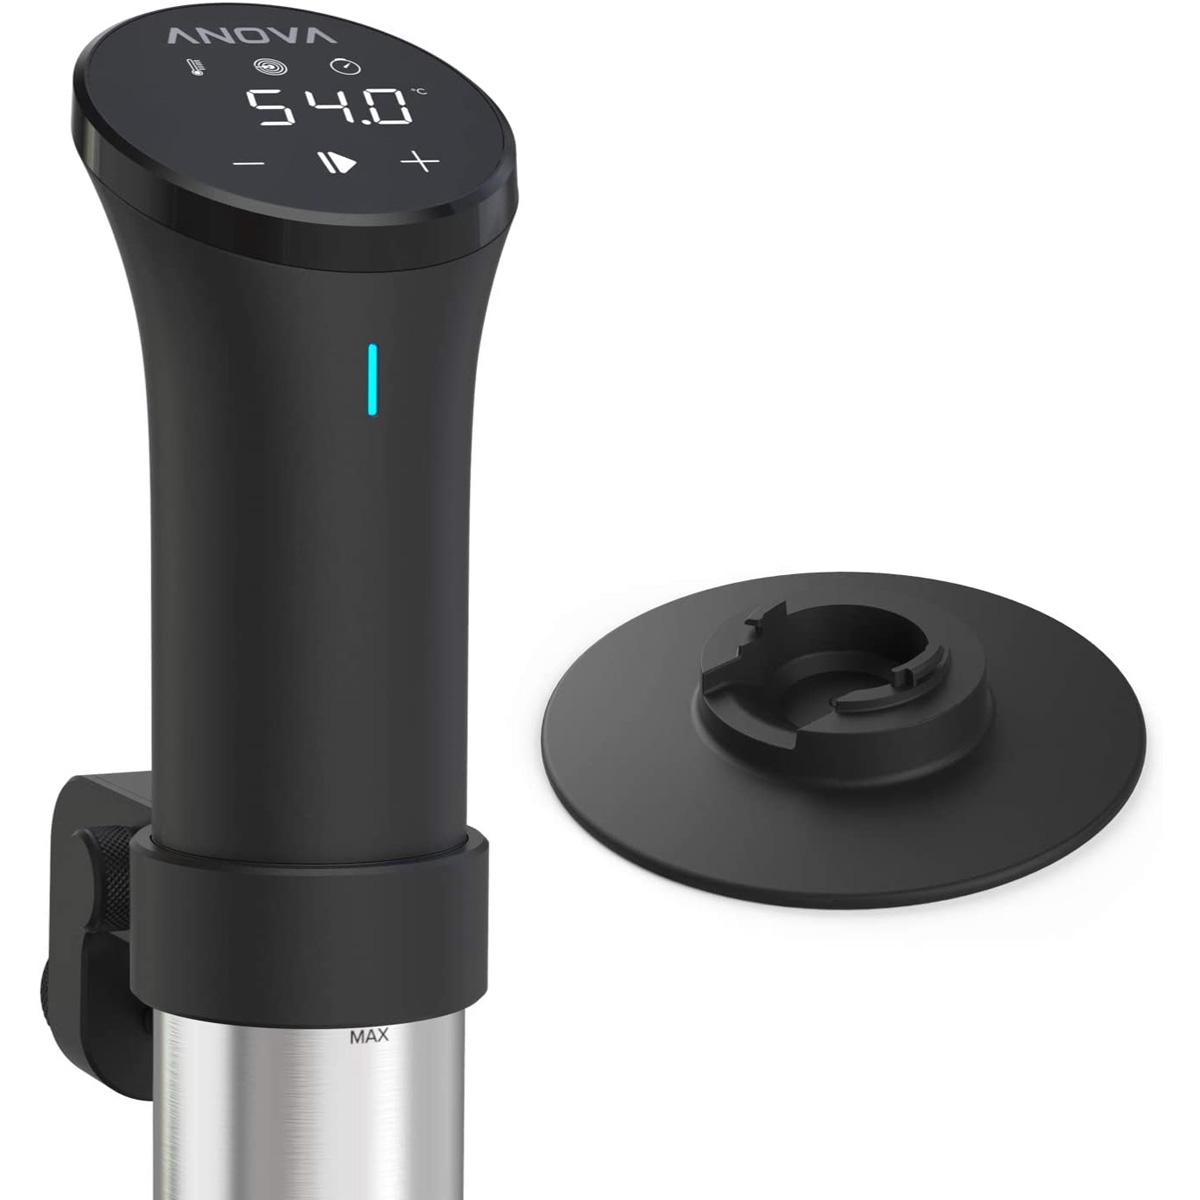 Anova Precision Cooker with Precision Base Bundle for $149 Shipped